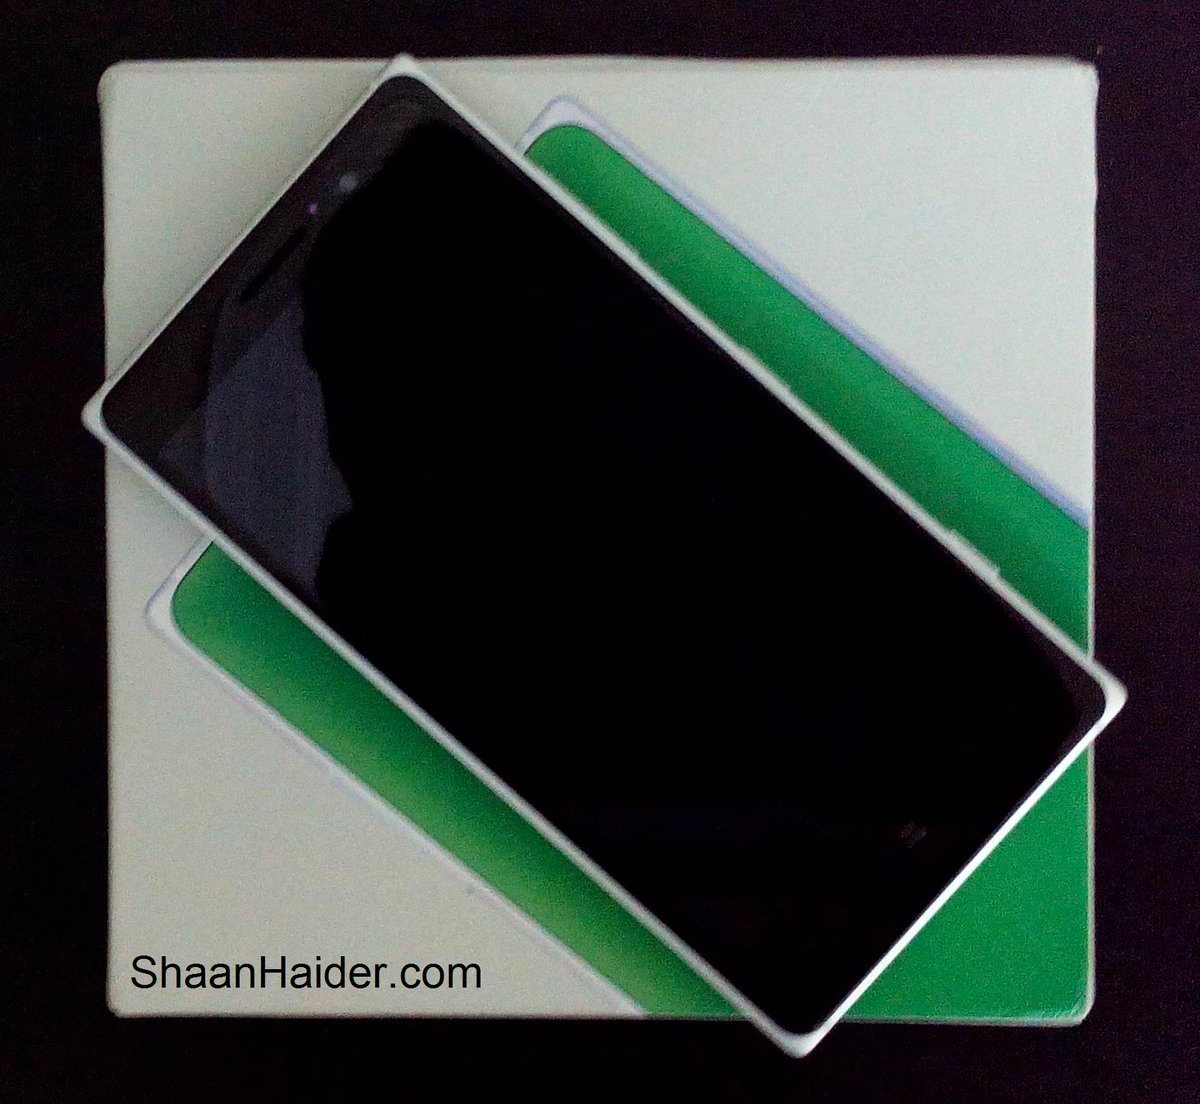 Nokia Lumia 830  Hands-on Review, Specs and Features